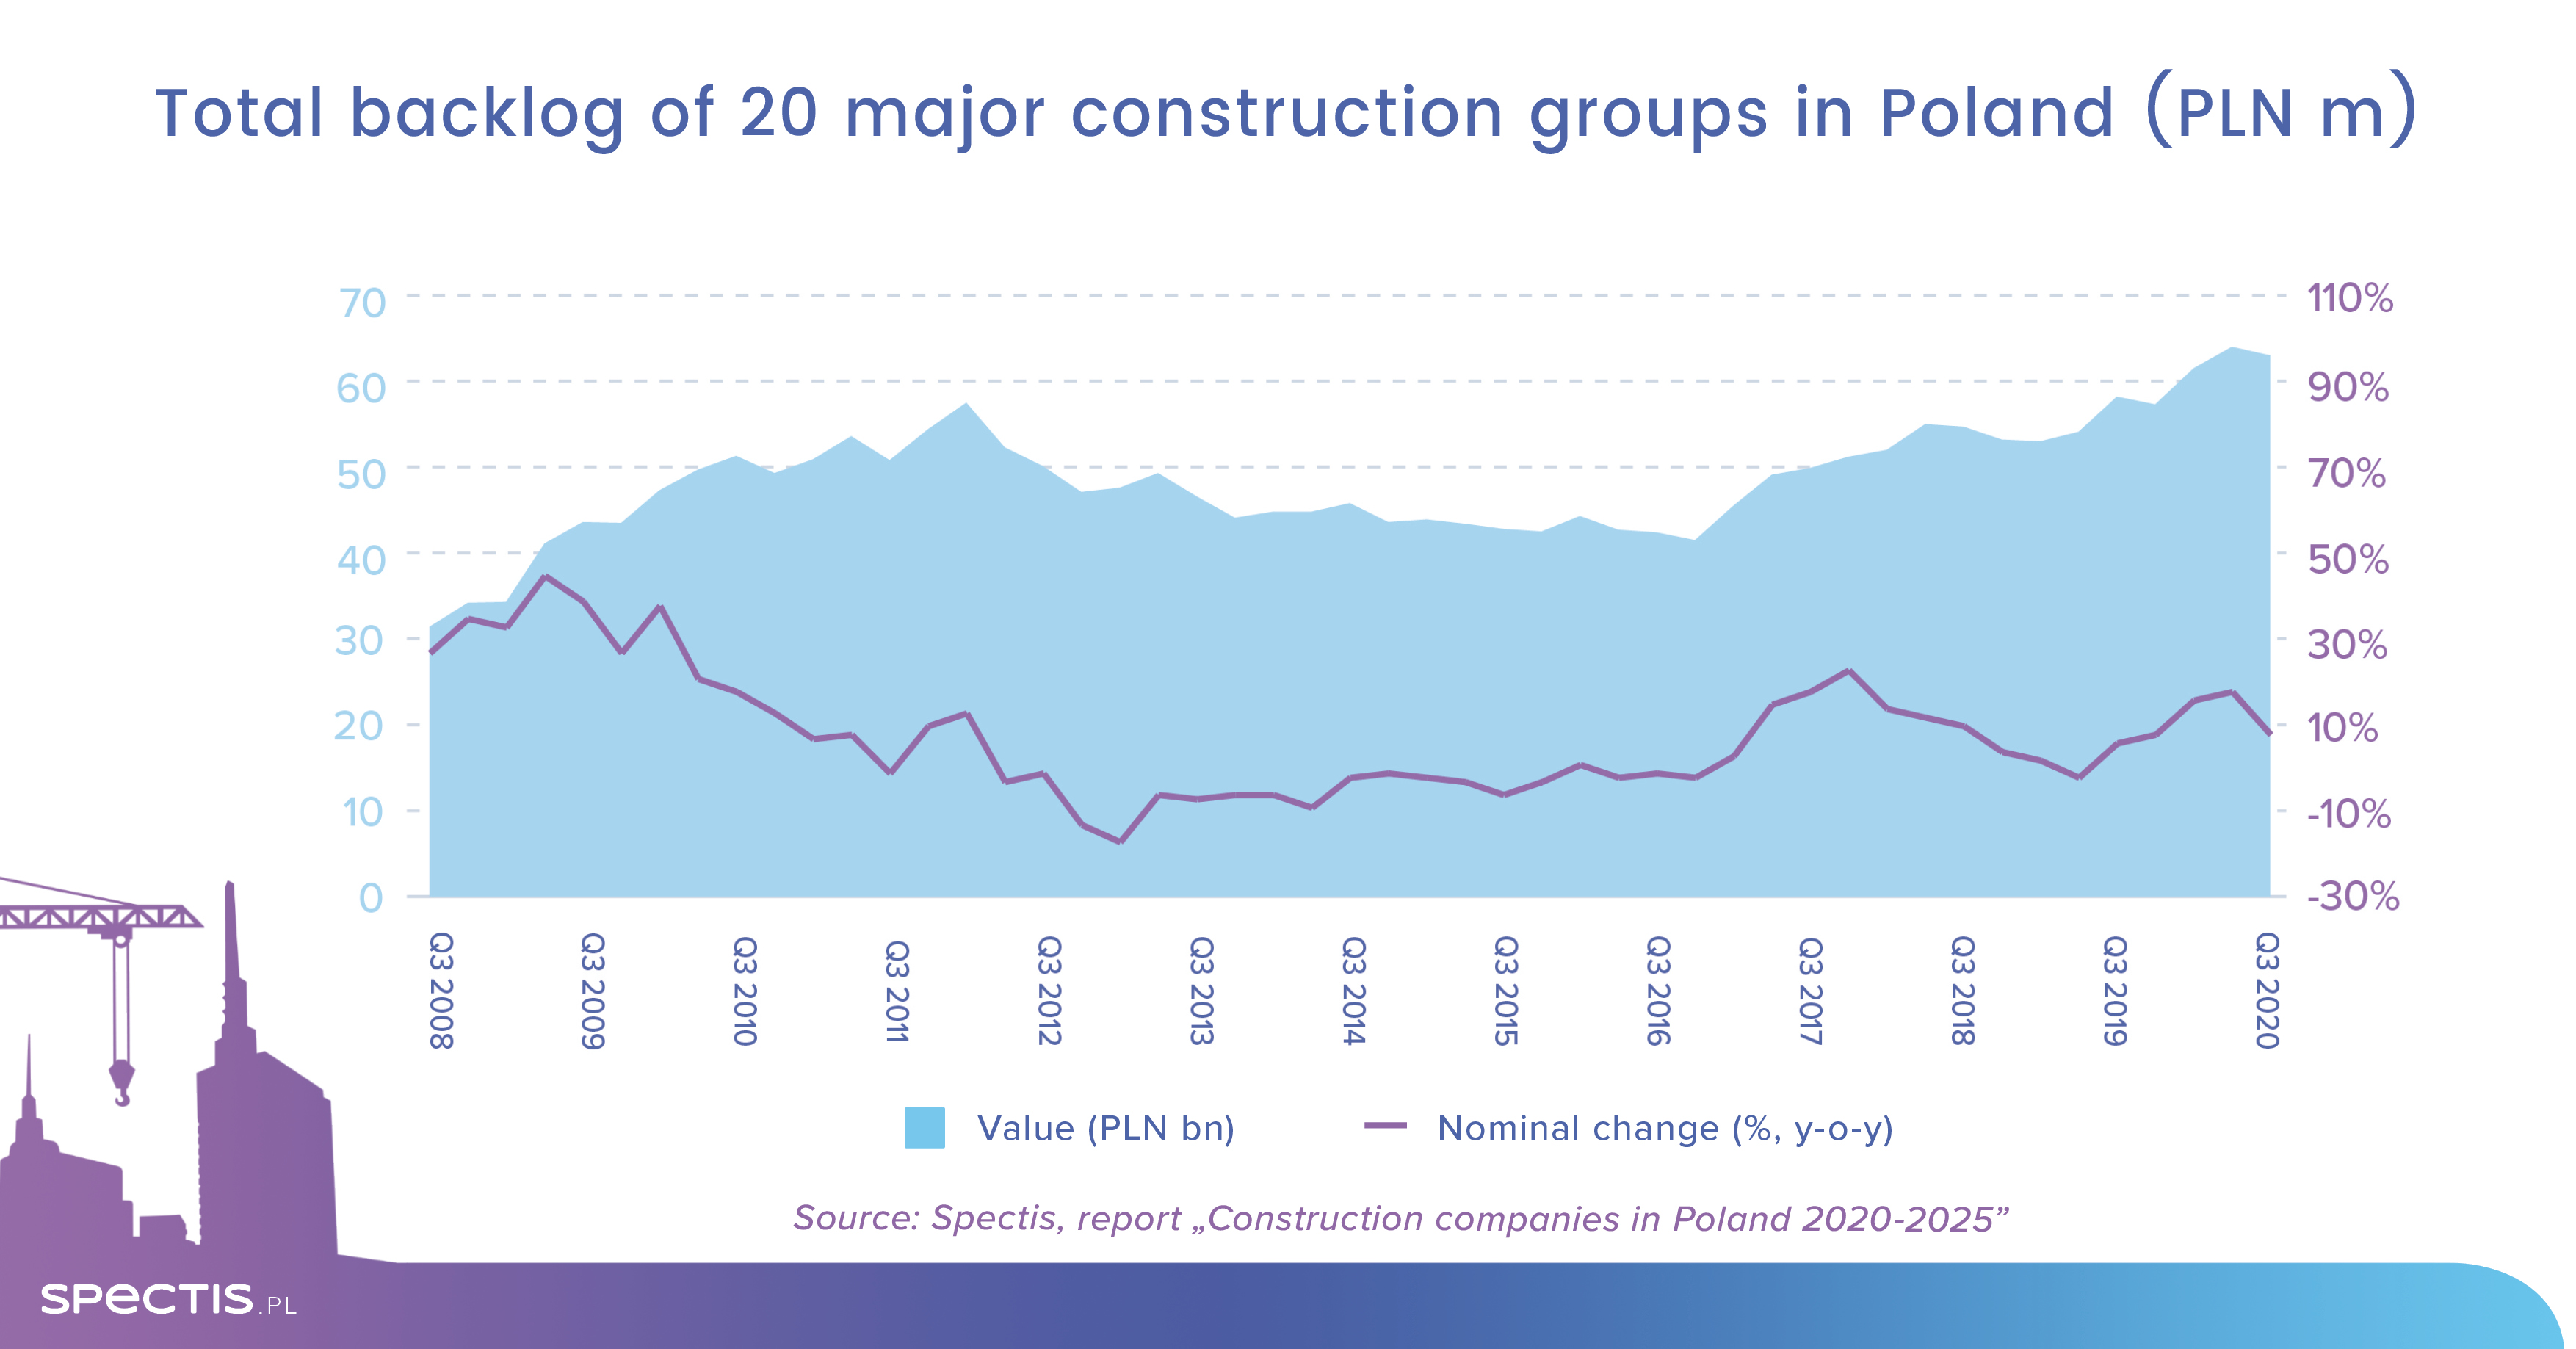 Polish construction industry likely to make recovery in H2 2021